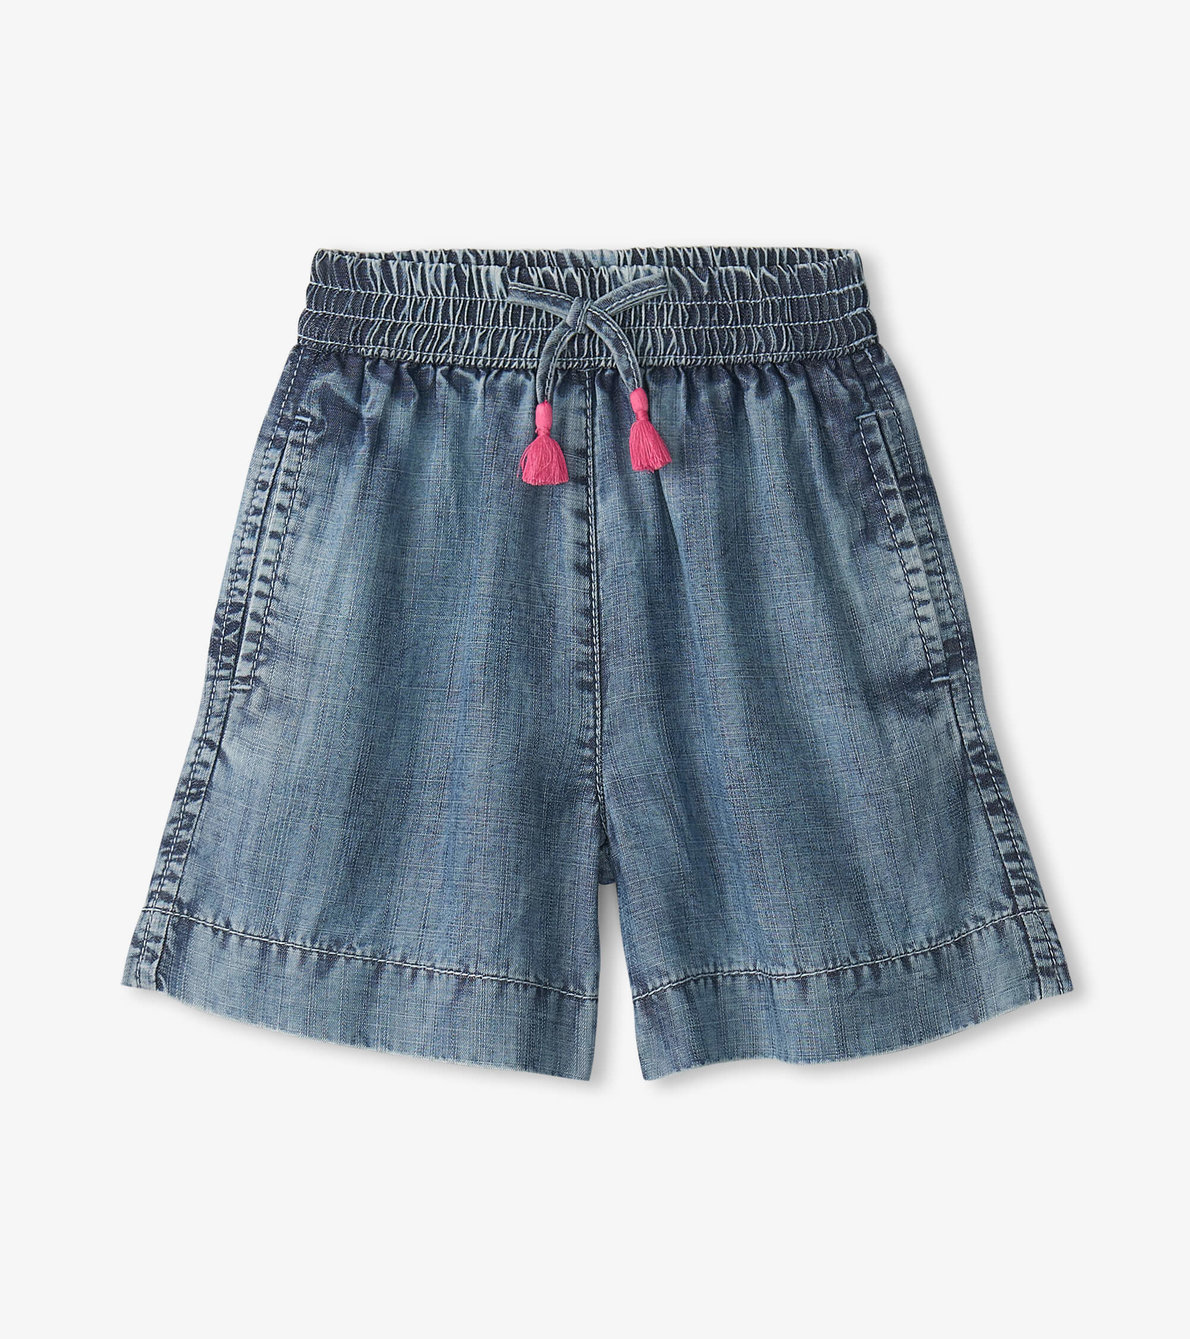 View larger image of Girls Tencel Flairy Shorts